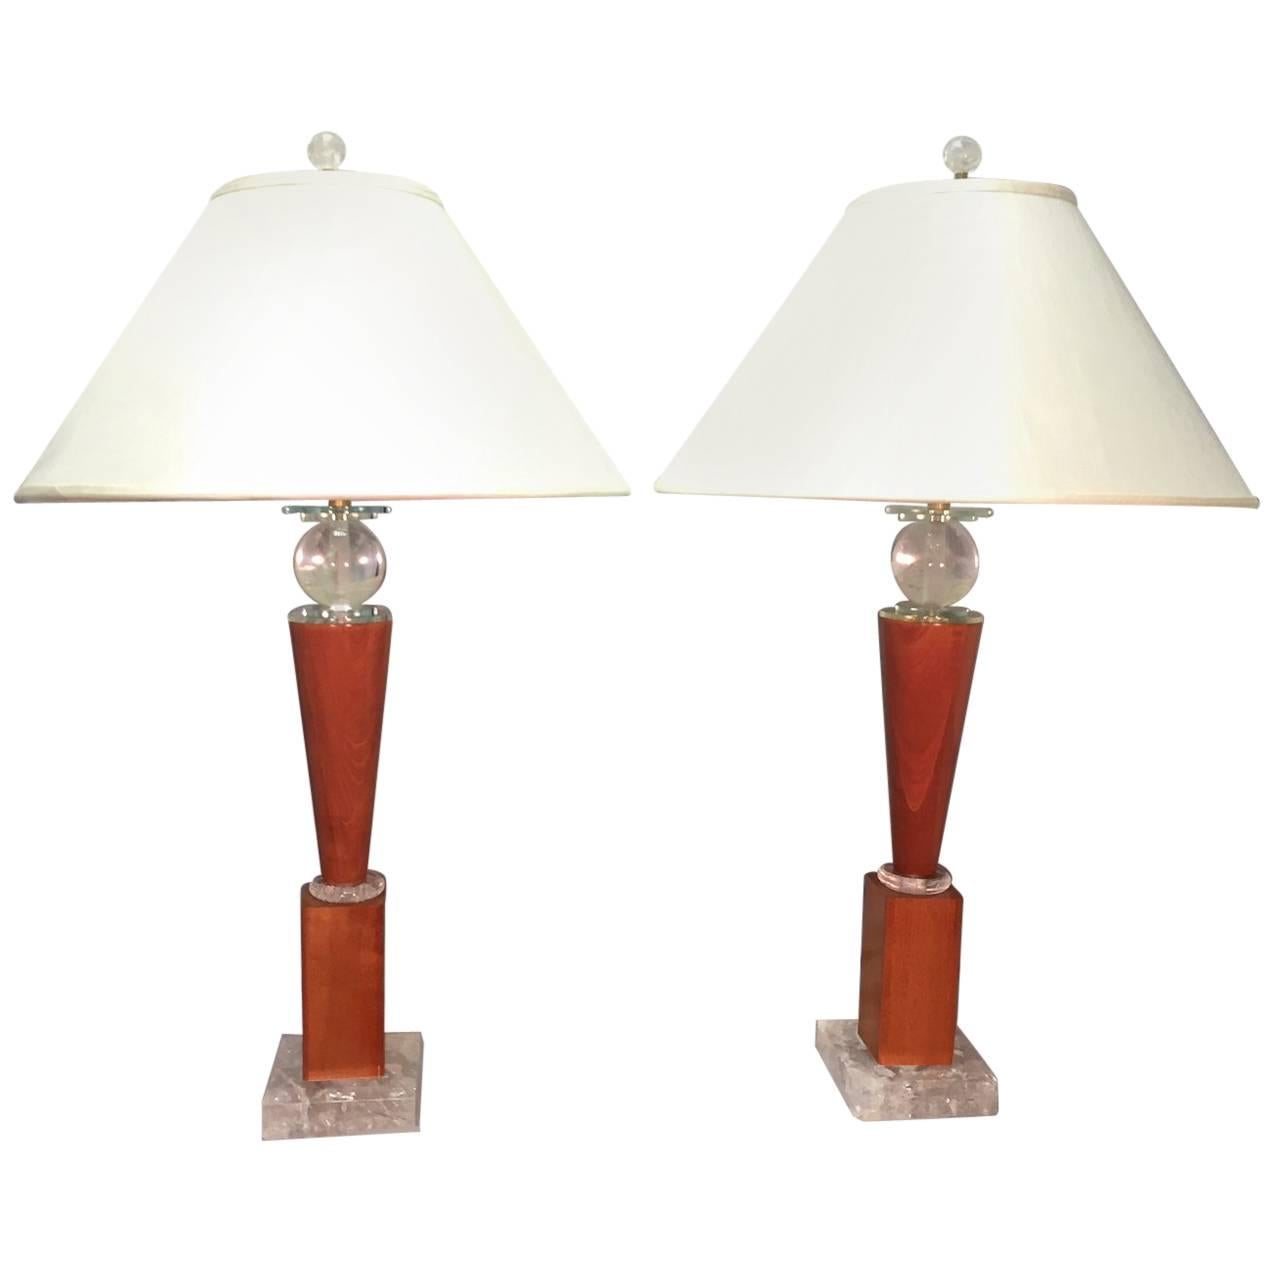 Pair of Modern Rock Crystal and Wood Lamps with Dupioni Silk Shades